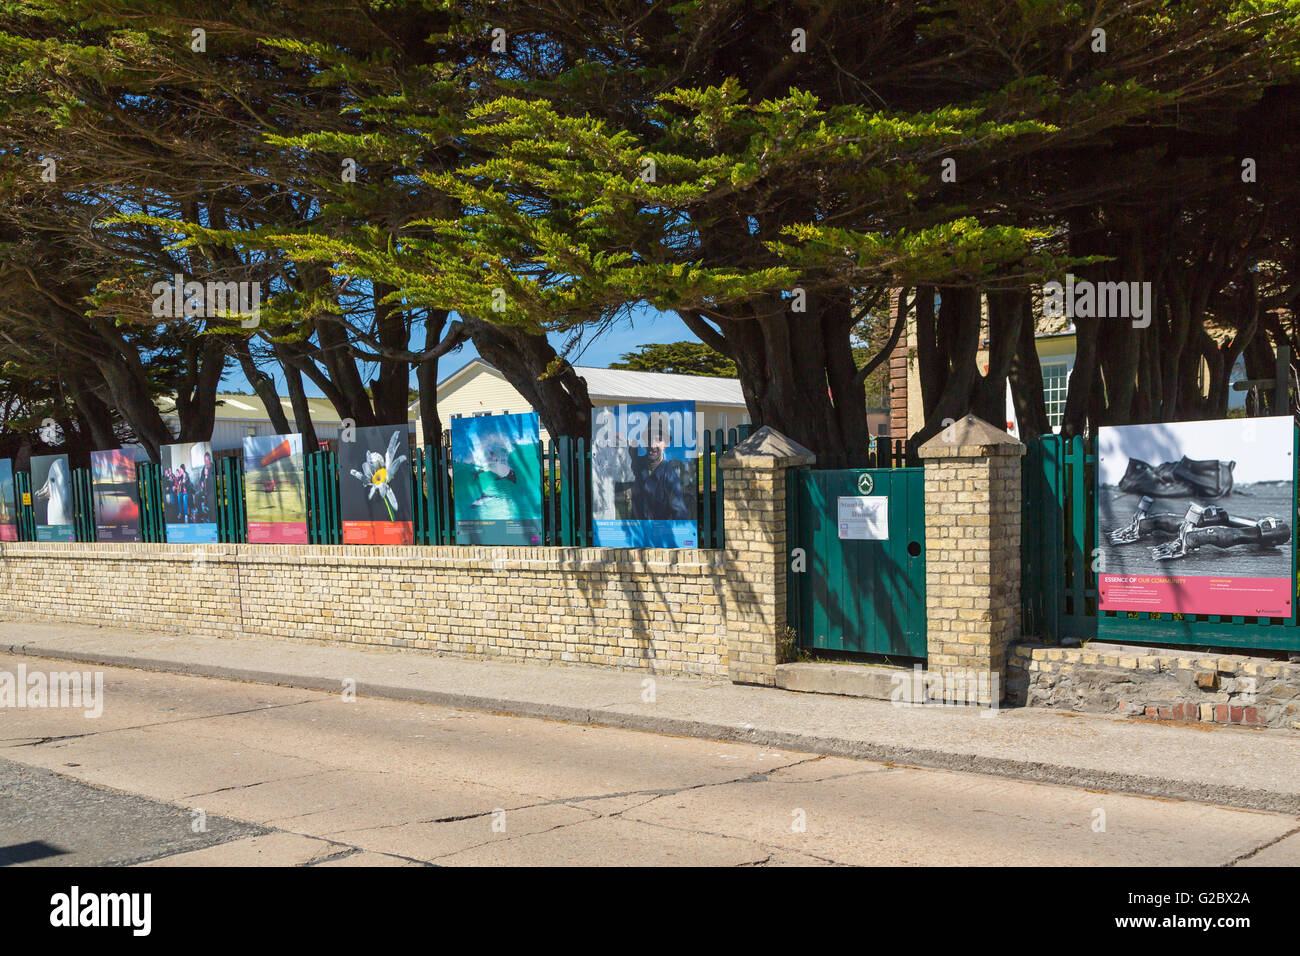 Artwork of local attractions displayed on the  streets of Stanley, East Falkland, Falkland Islands, British Overseas Territory. Stock Photo